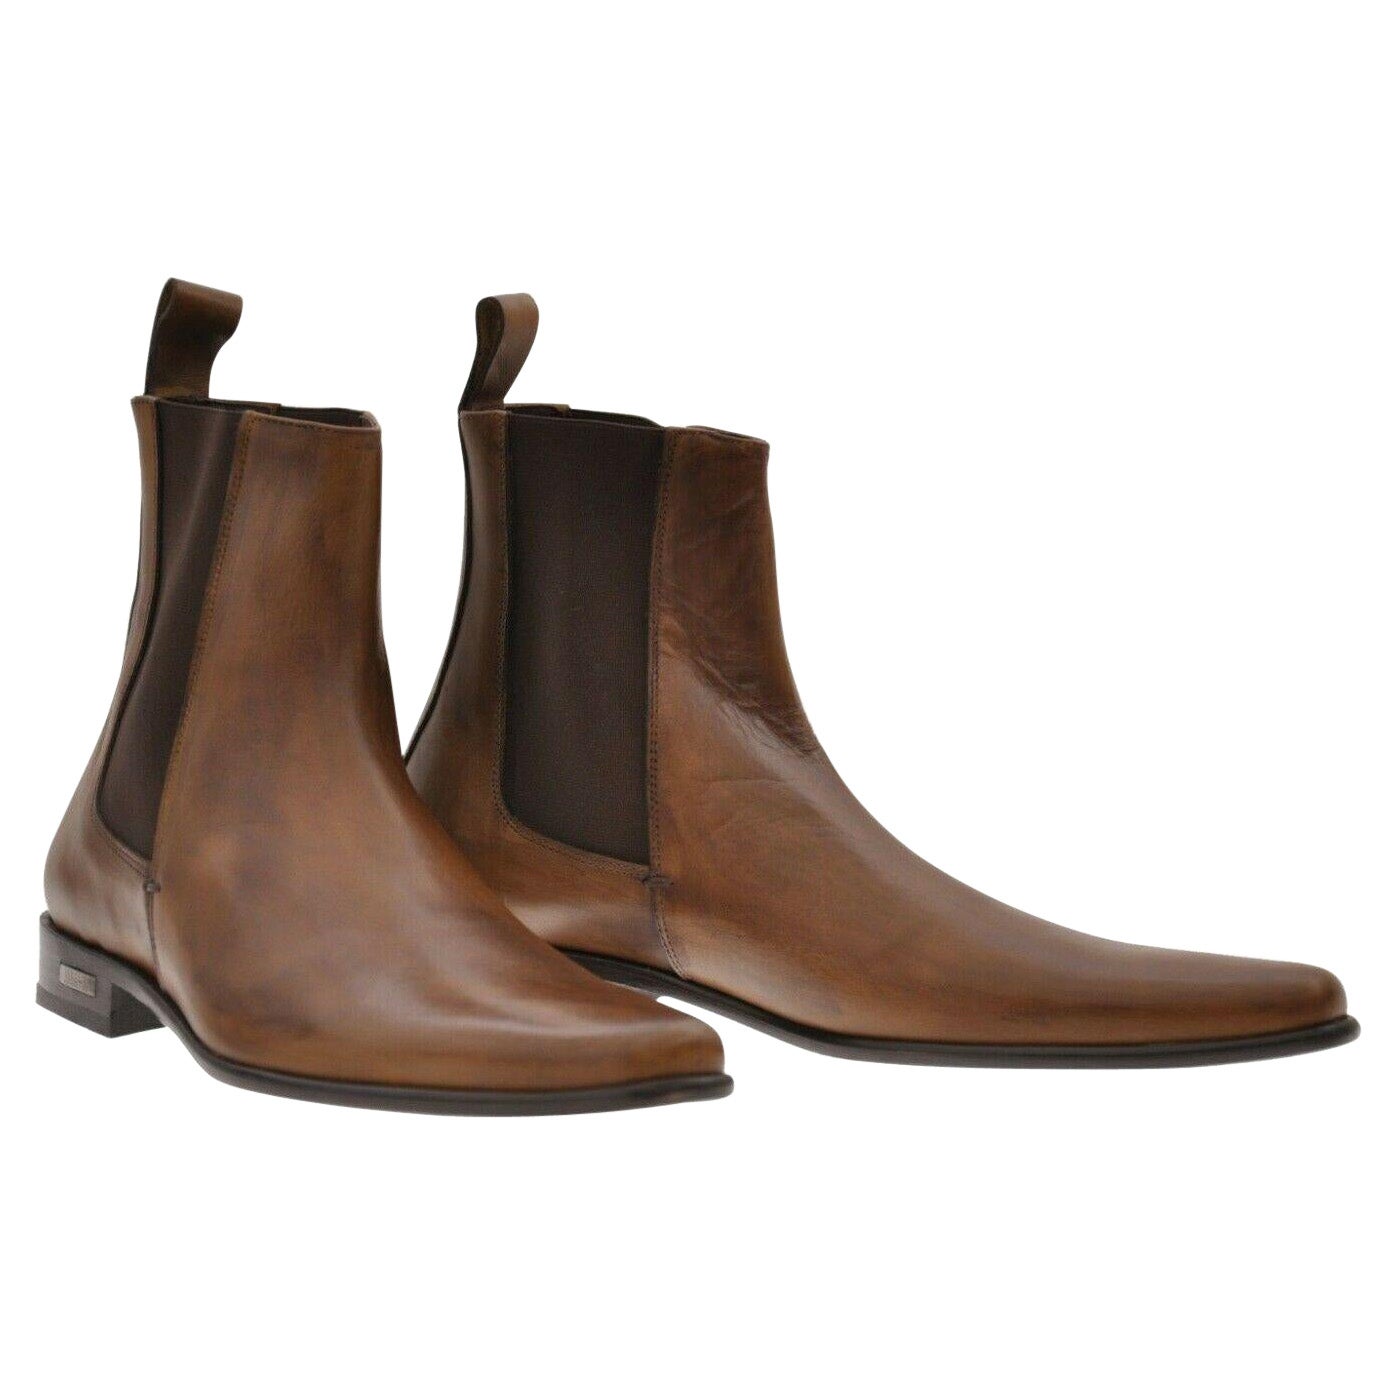 VERSACE COLLECTION BROWN LEATHER Boots 40 - 7; 42 - 9